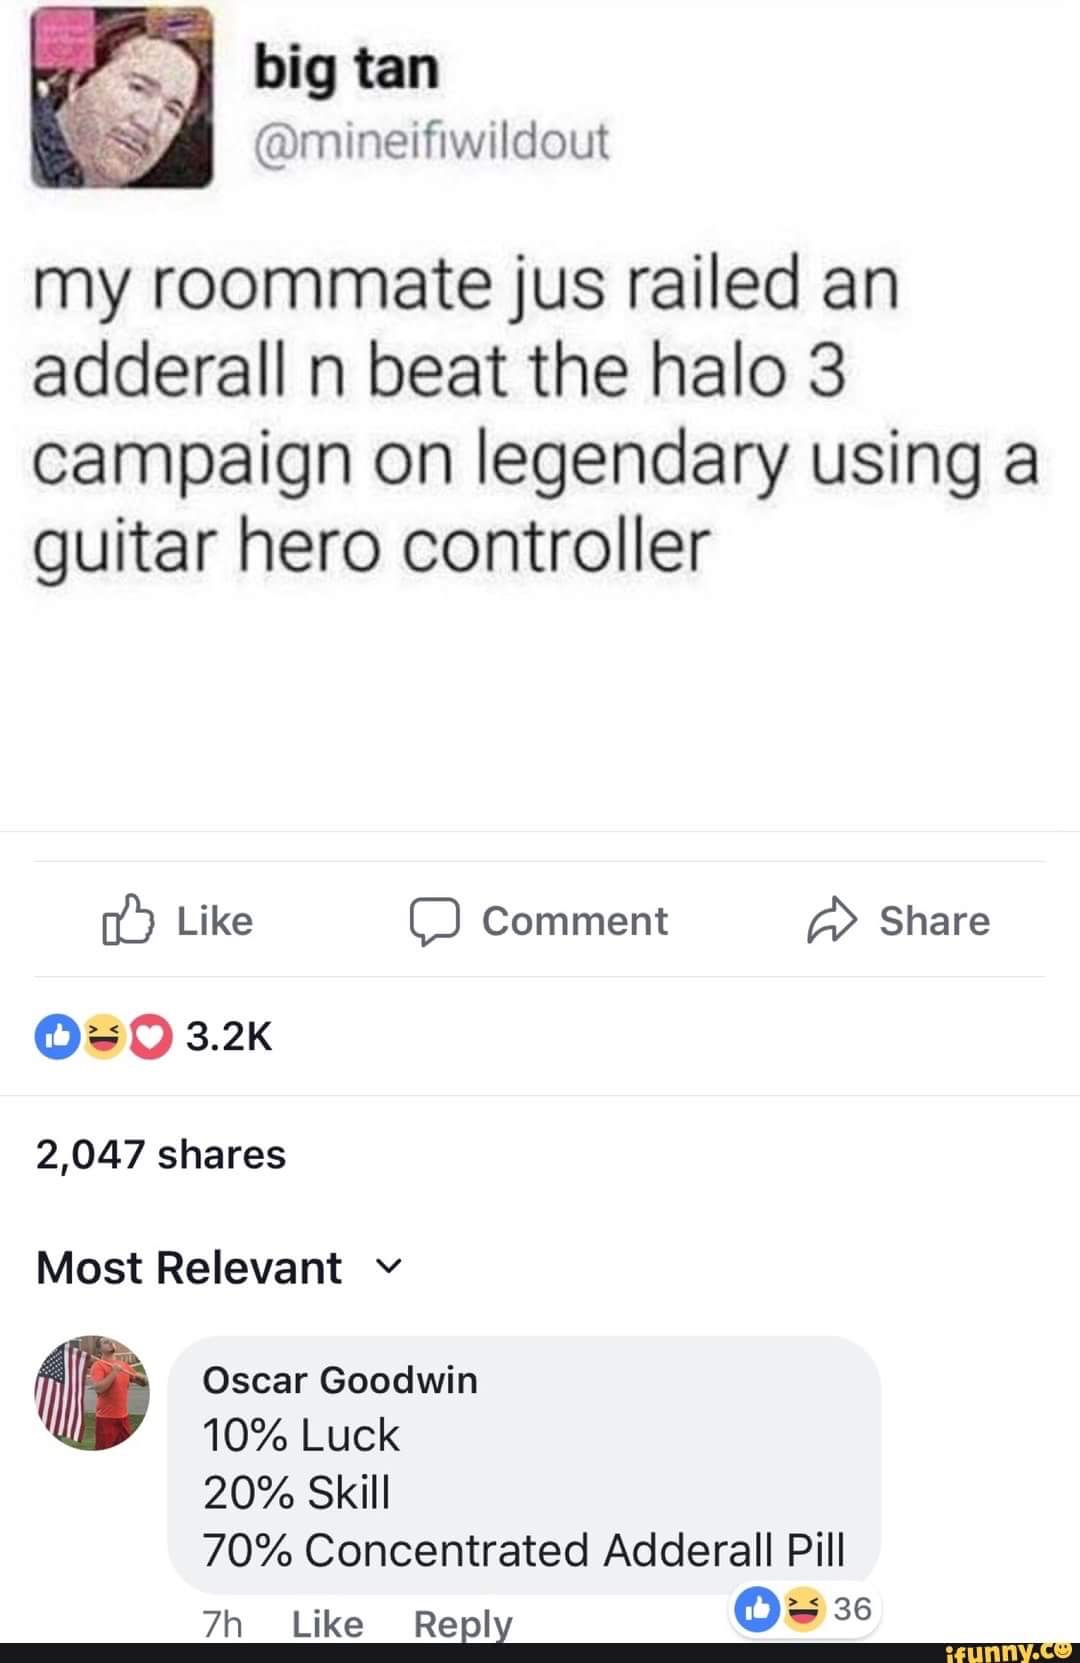 dank meme about screenshot - big tan my roommate jus railed an adderall n beat the halo 3 campaign on legendary using a guitar hero controller Comment 0 2,047 Most Relevant v Oscar Goodwin 10% Luck 20% Skill 70% Concentrated Adderall Pill 7h 36 ifunny.co